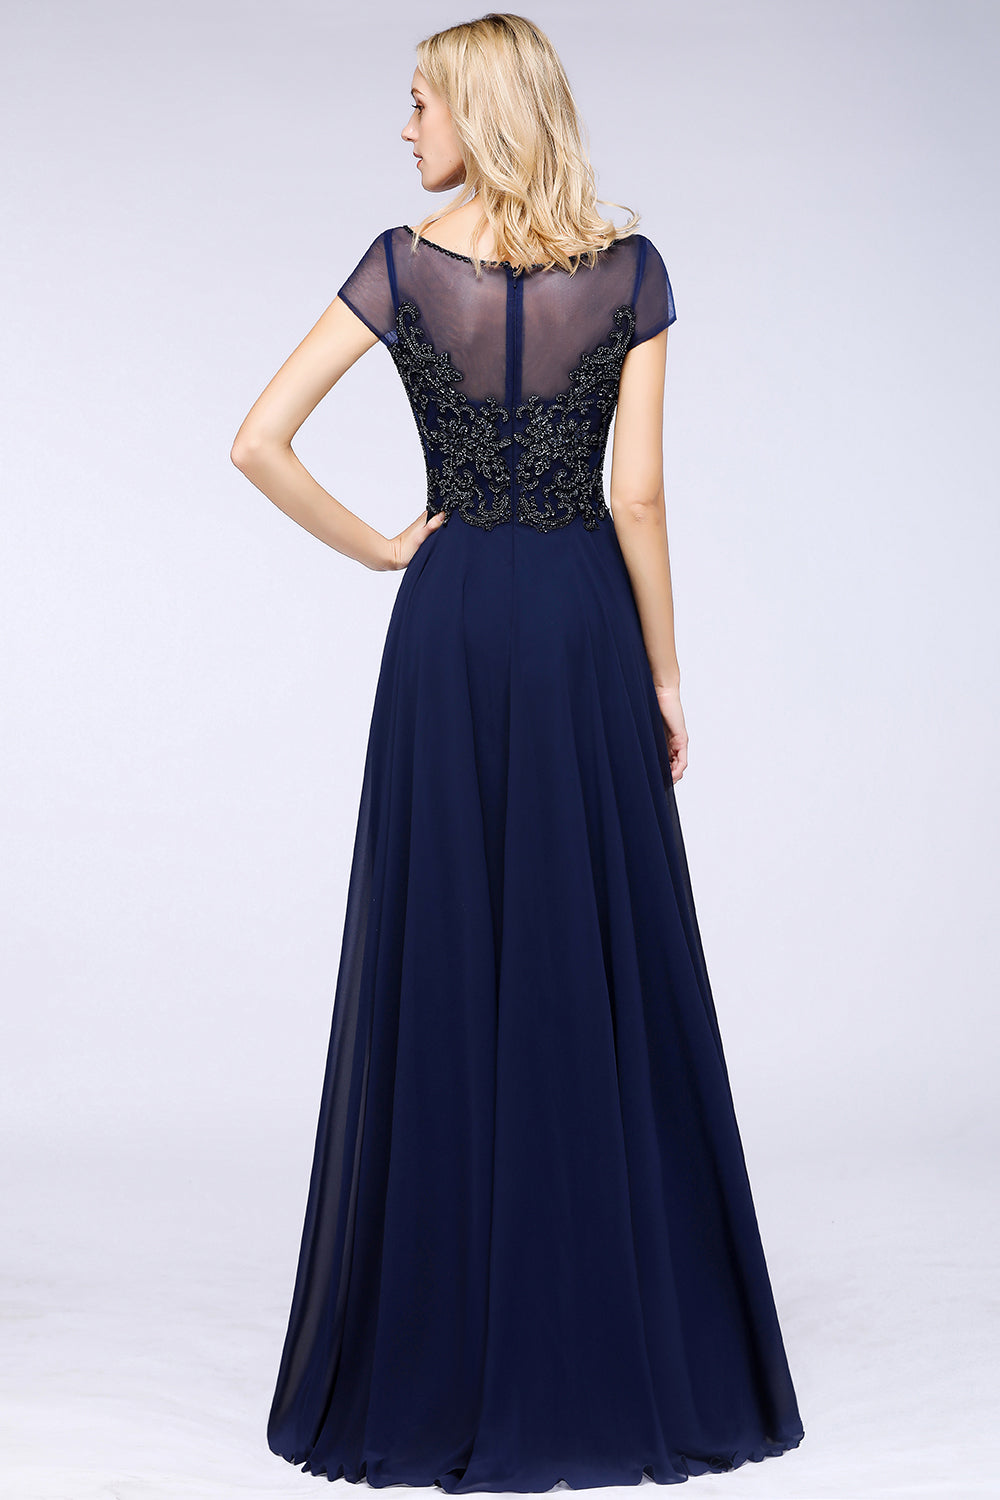 Elegant Long A-Line Appliques Beads Chiffon Bridesmaid Dress with Sleeves-BIZTUNNEL